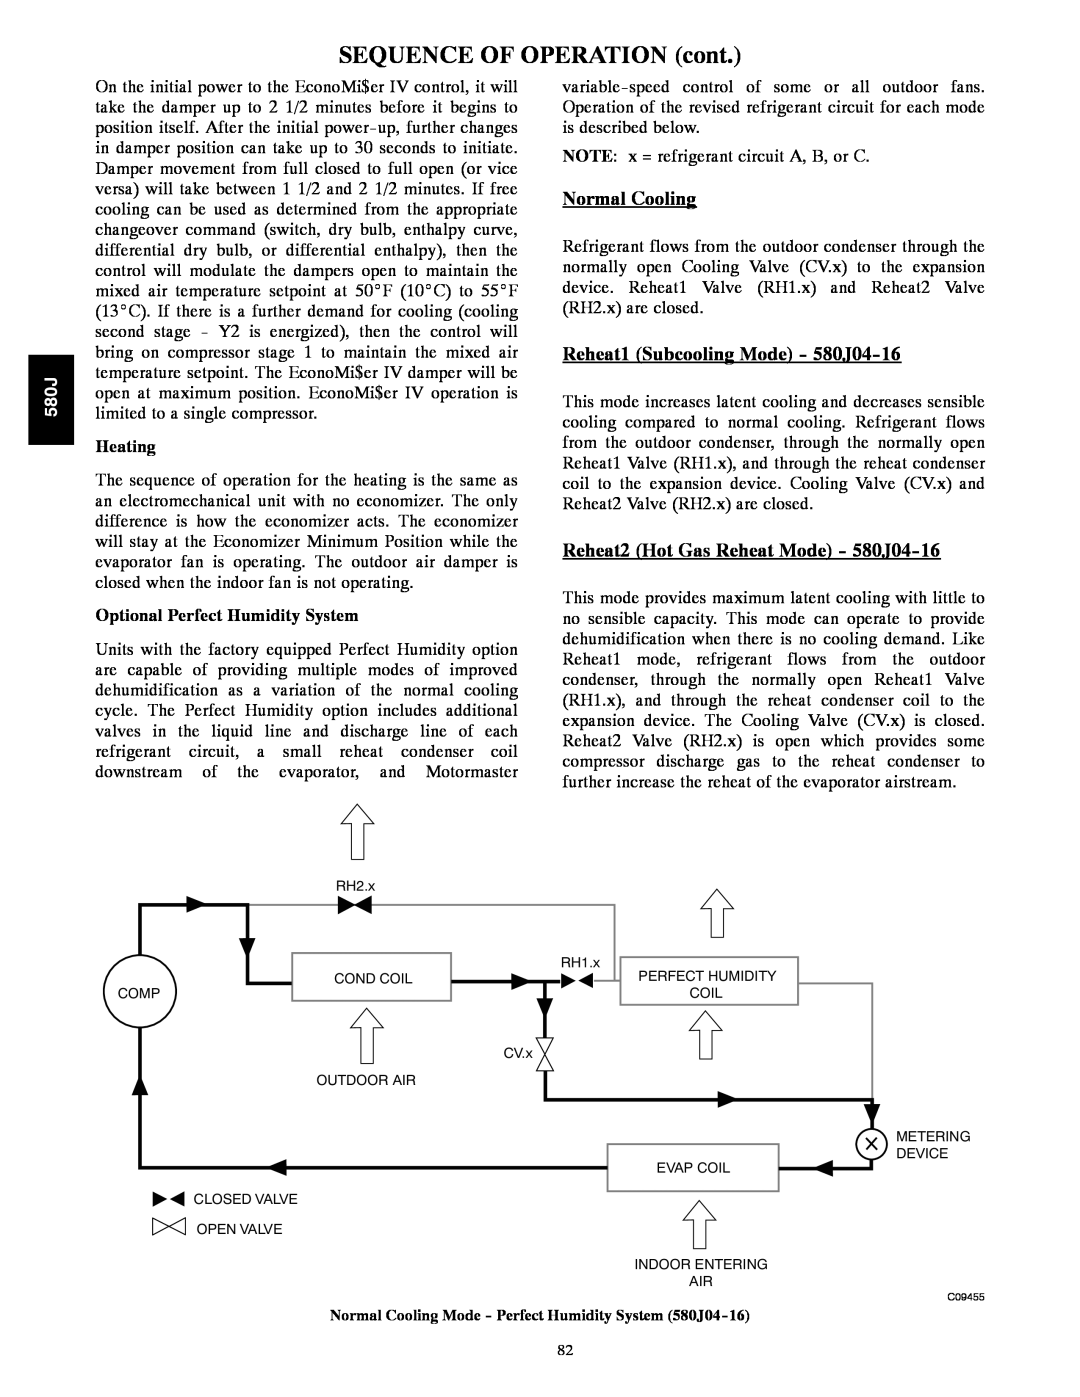 Bryant manual SEQUENCE OF OPERATION cont, Normal Cooling, Reheat1 Subcooling Mode - 580J04-16, Heating 